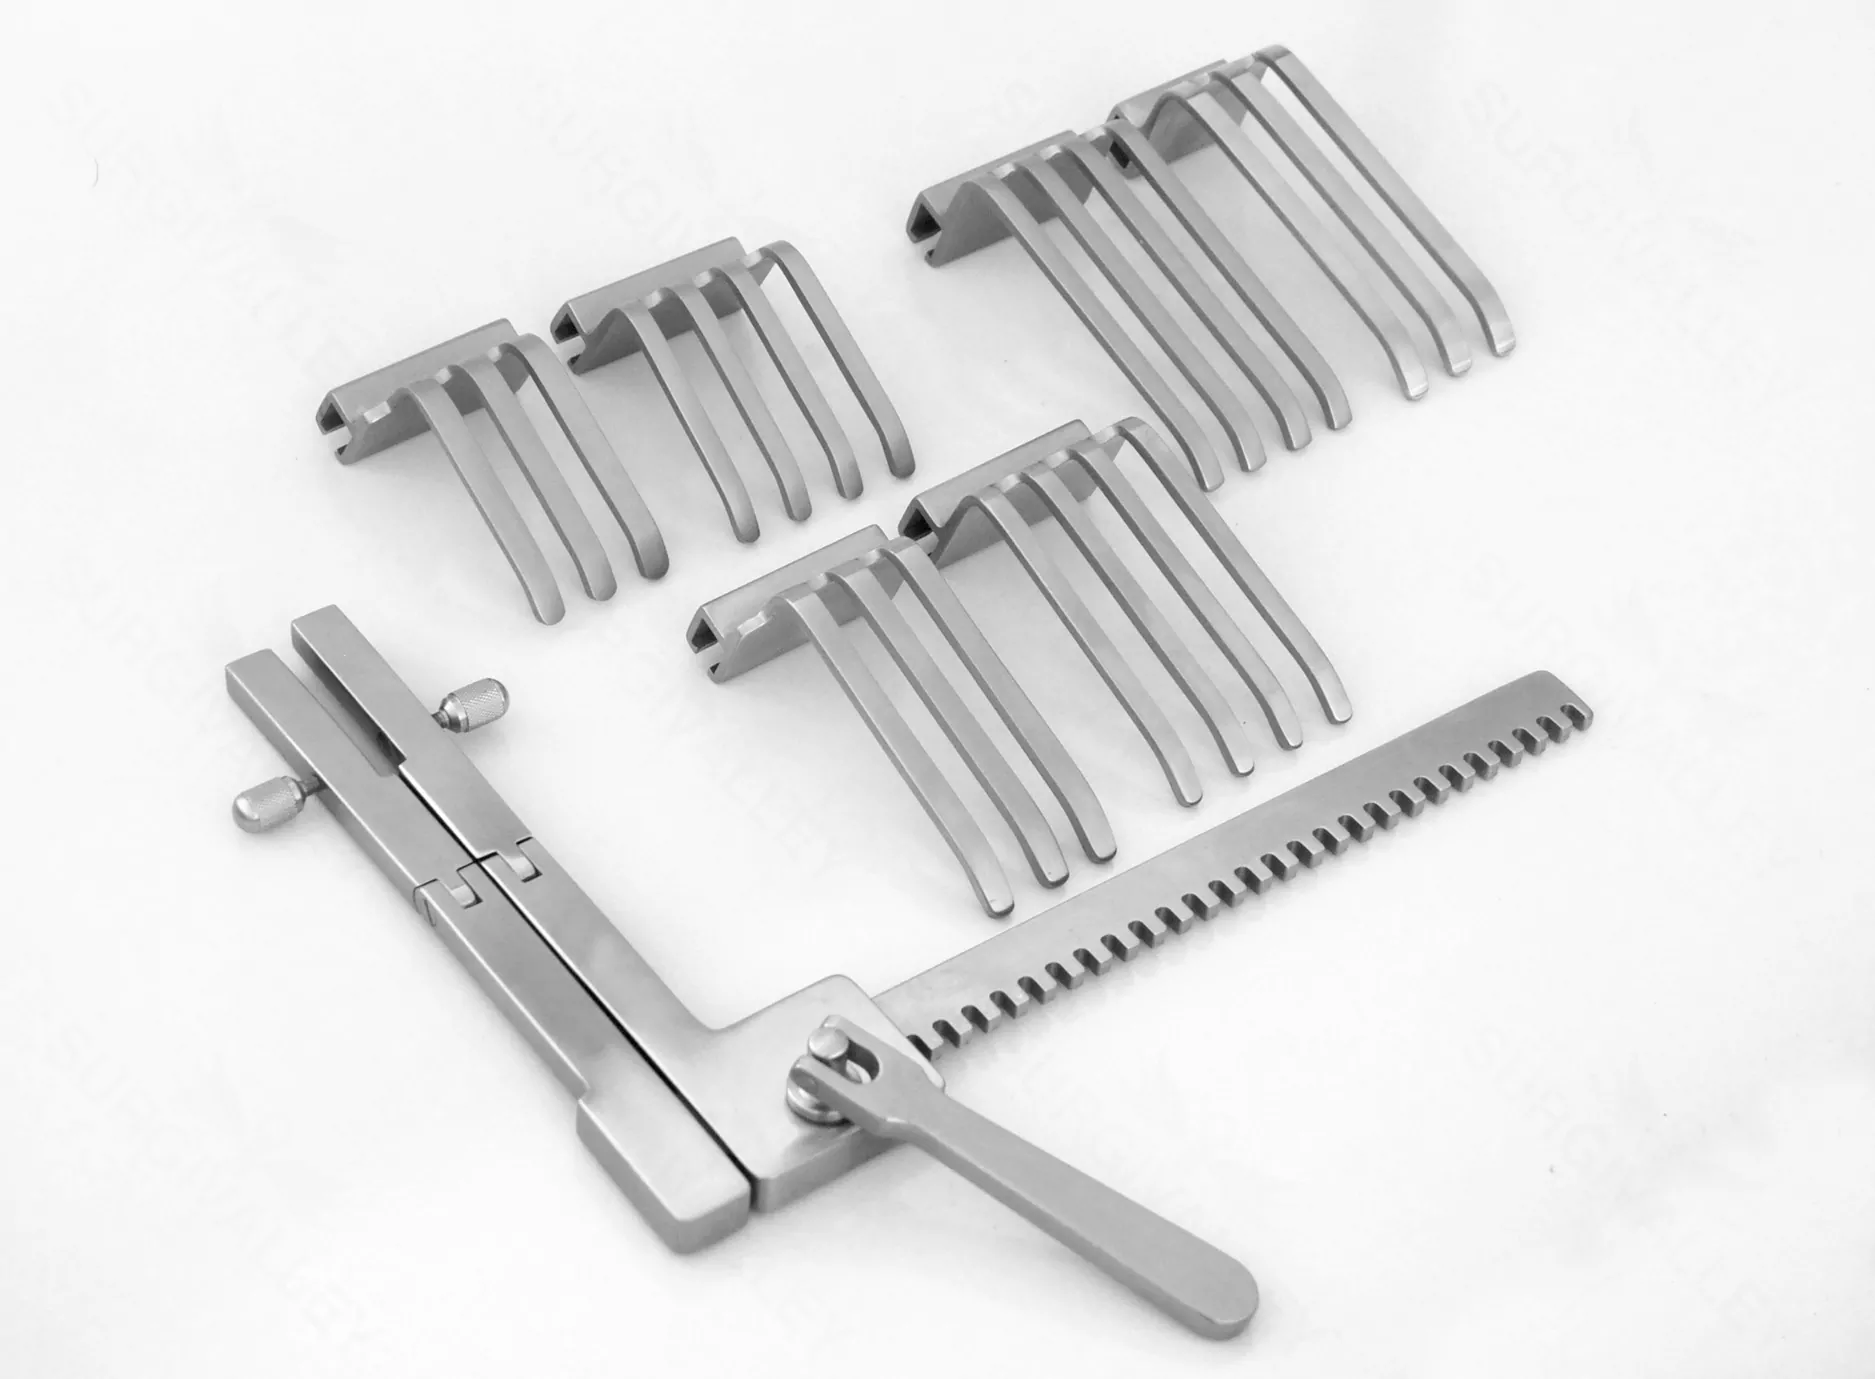 French Model Laminectomy Retractor Set With Hinged Arms & Six Blades